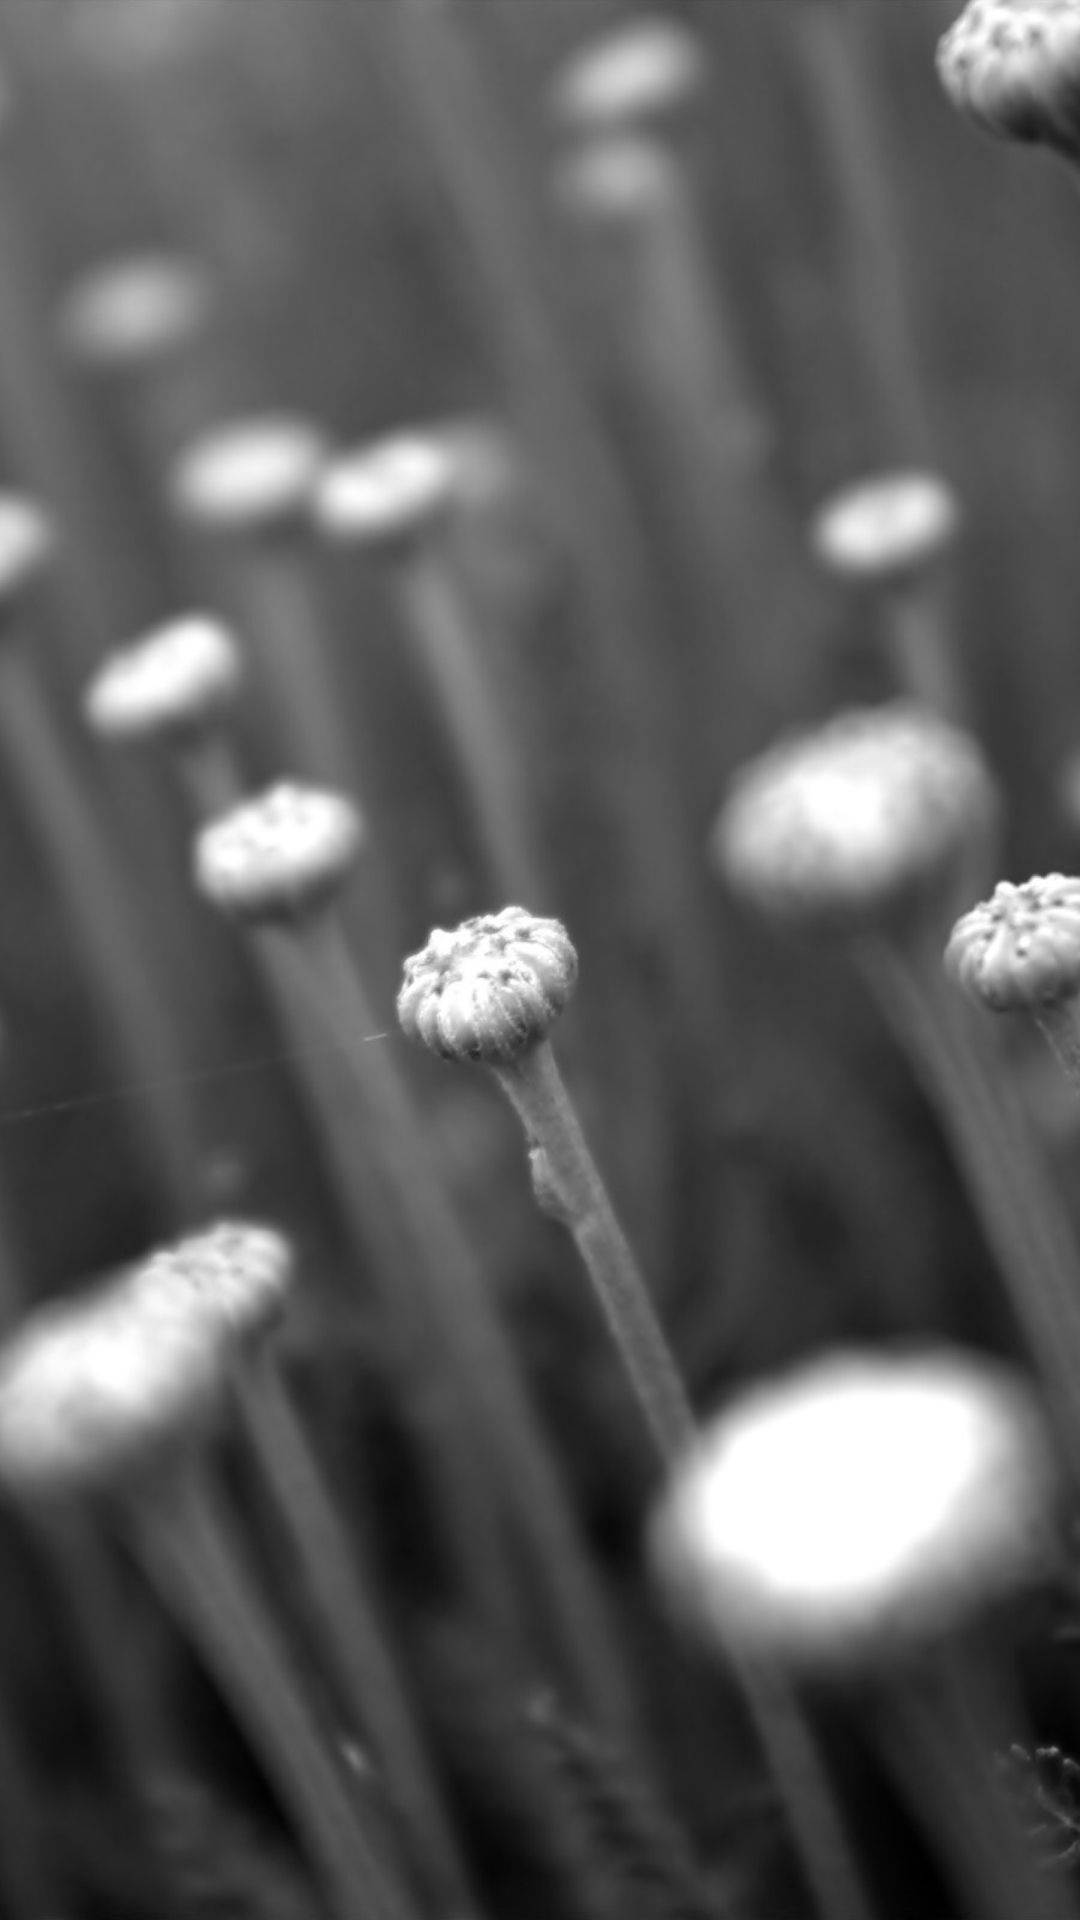 Black And White Flower Buds wallpaper 1080x1920